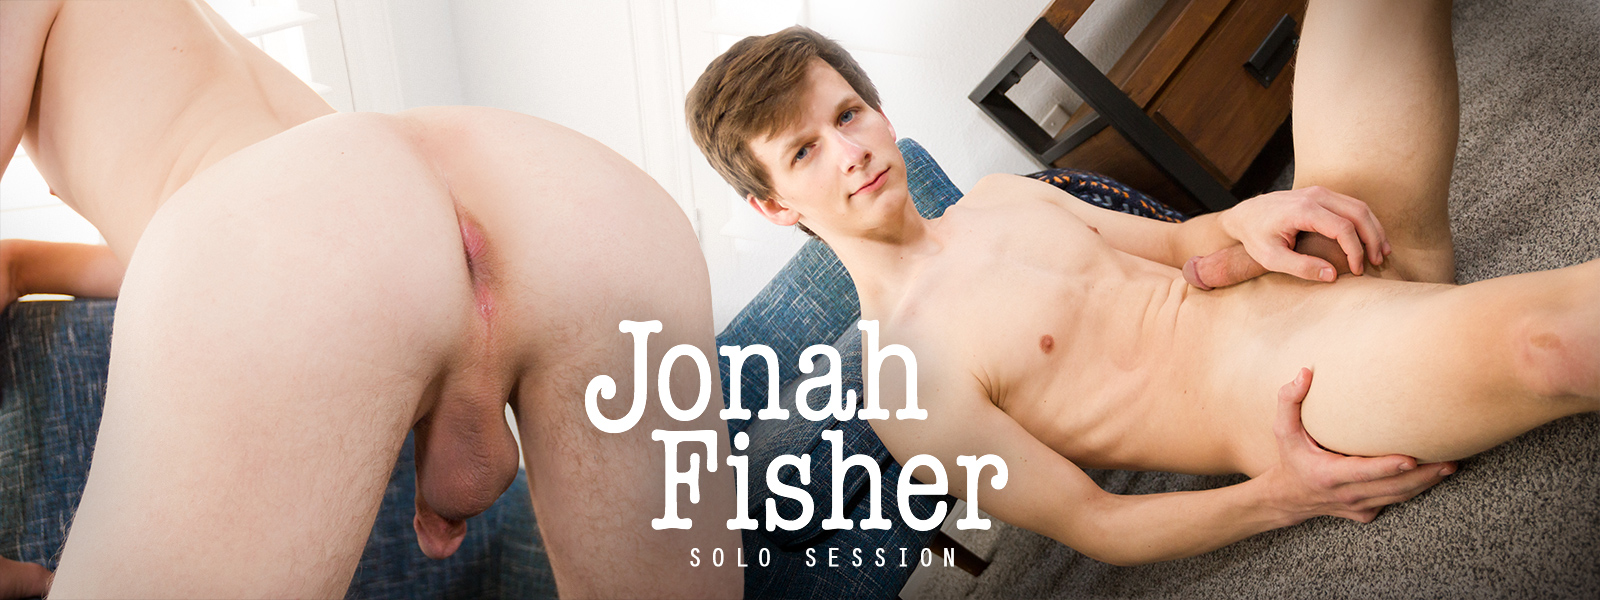 8teenBoy: Jonah Fisher Solo Session